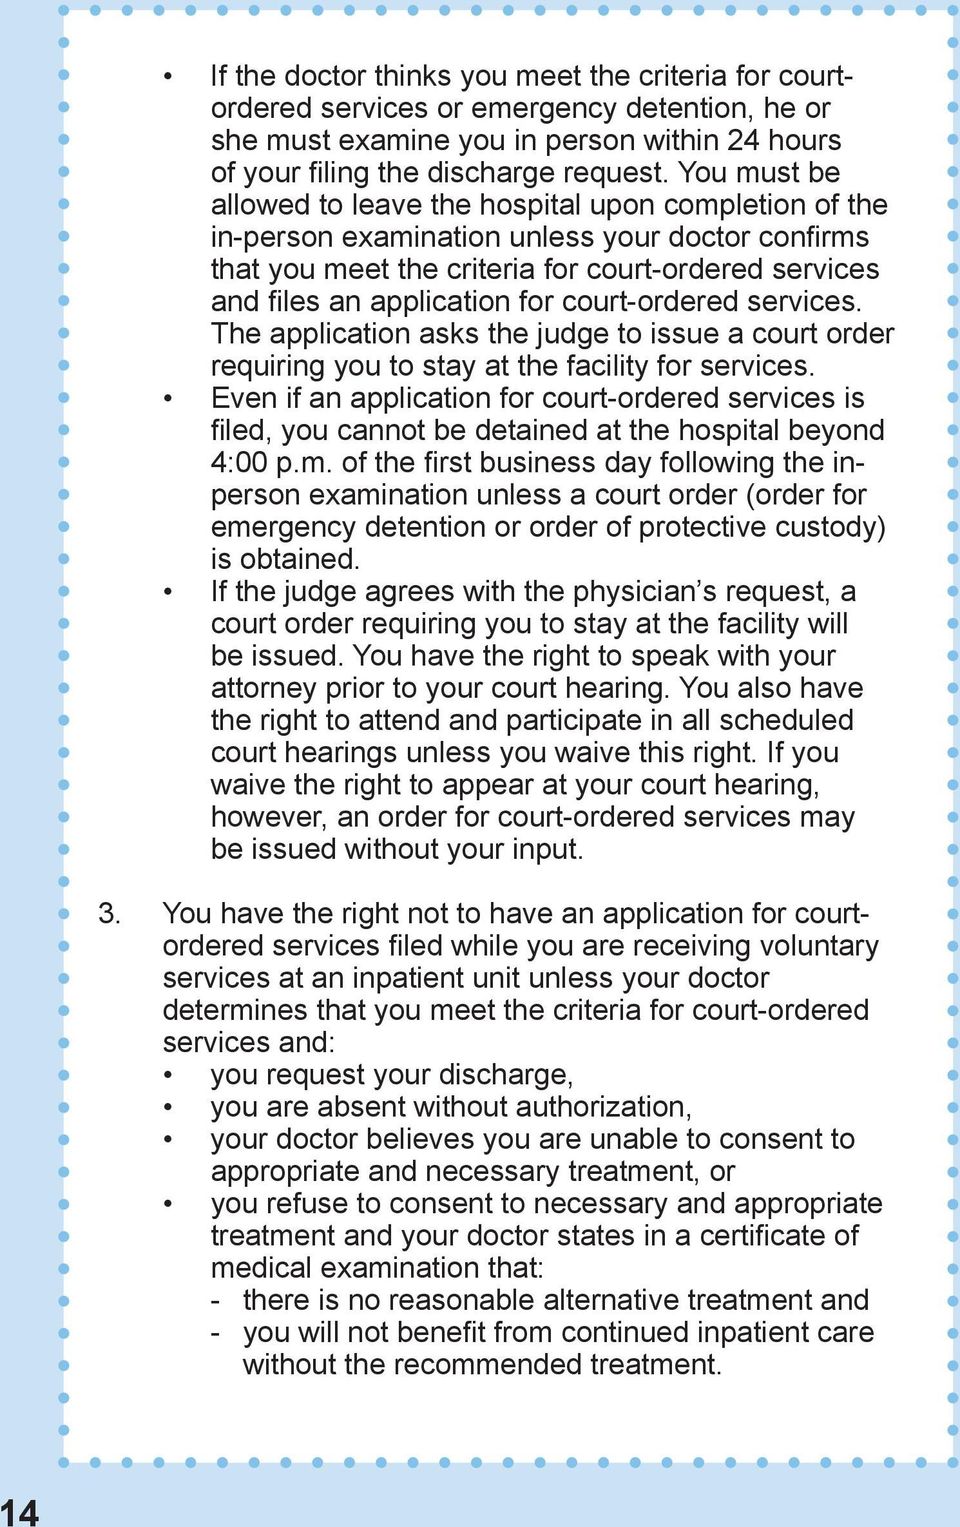 court-ordered services. The application asks the judge to issue a court order requiring you to stay at the facility for services.